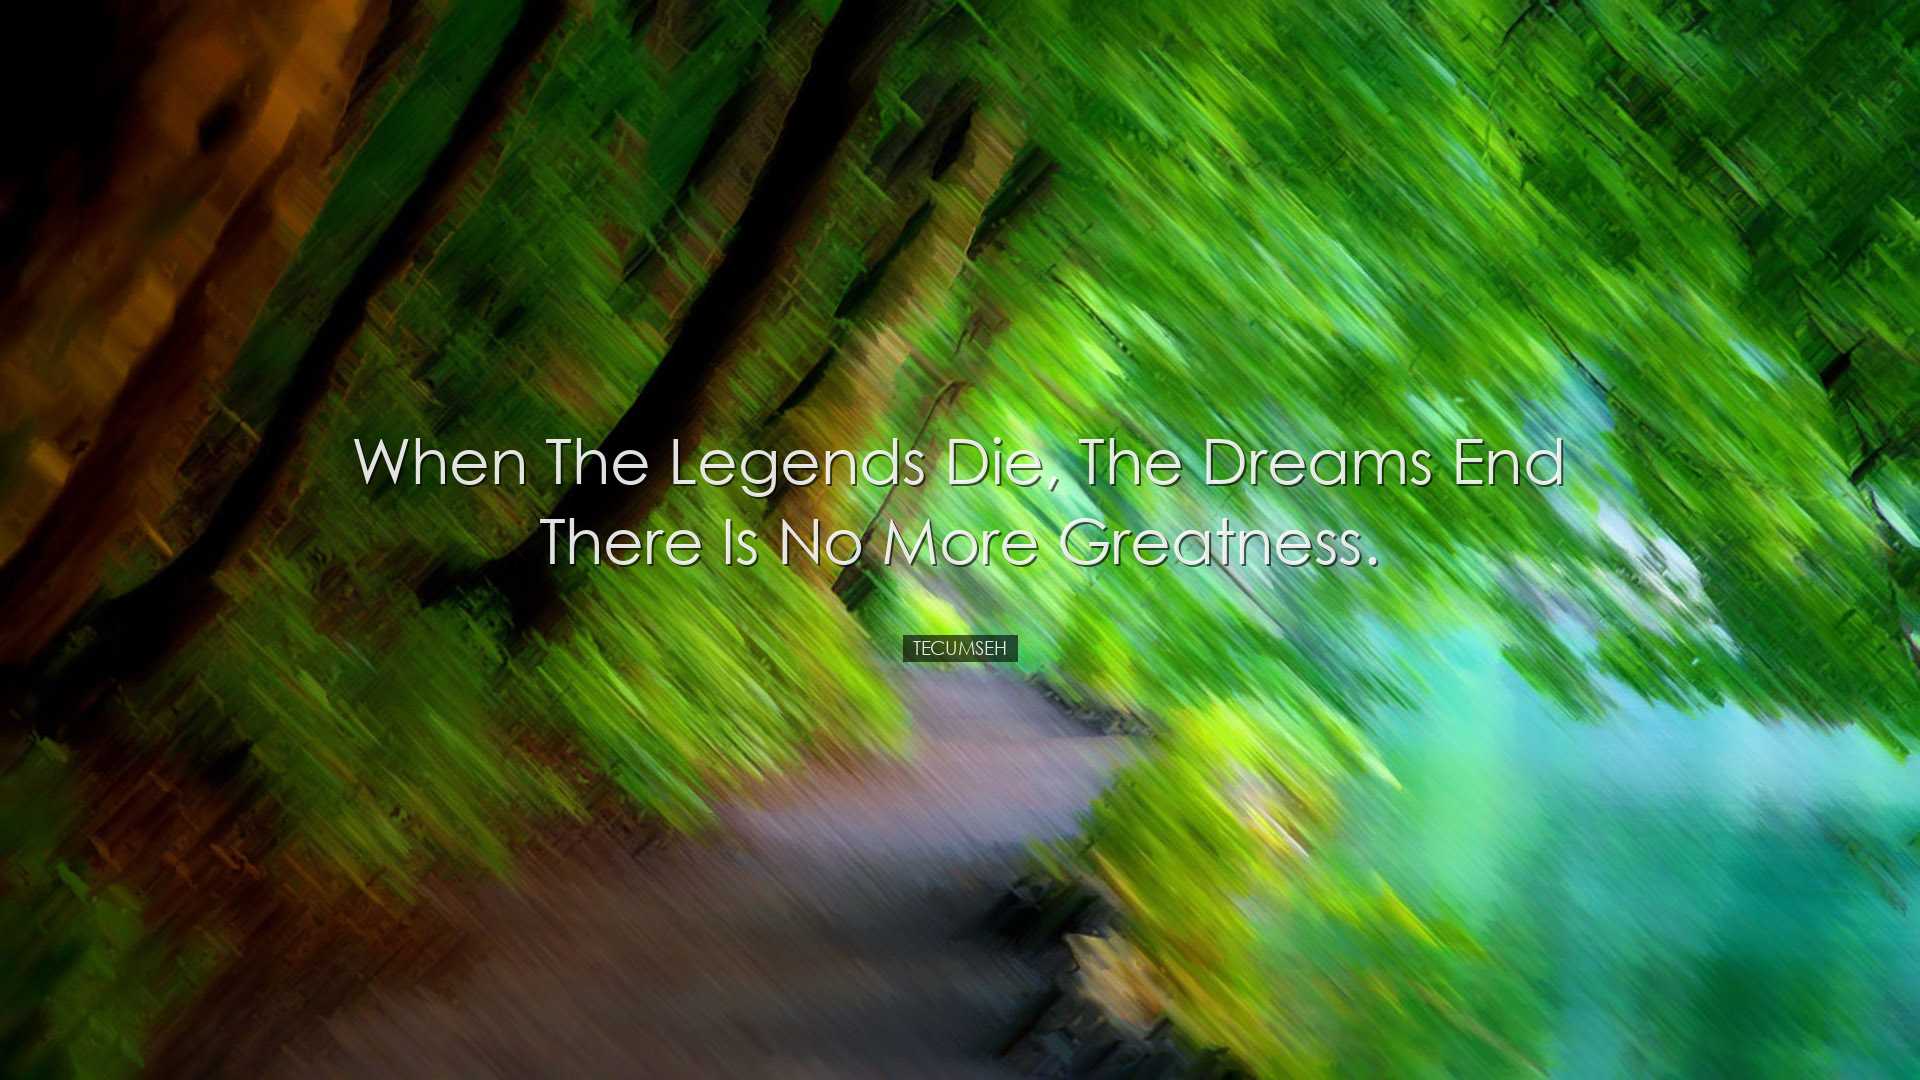 When the legends die, the dreams end there is no more greatness. -